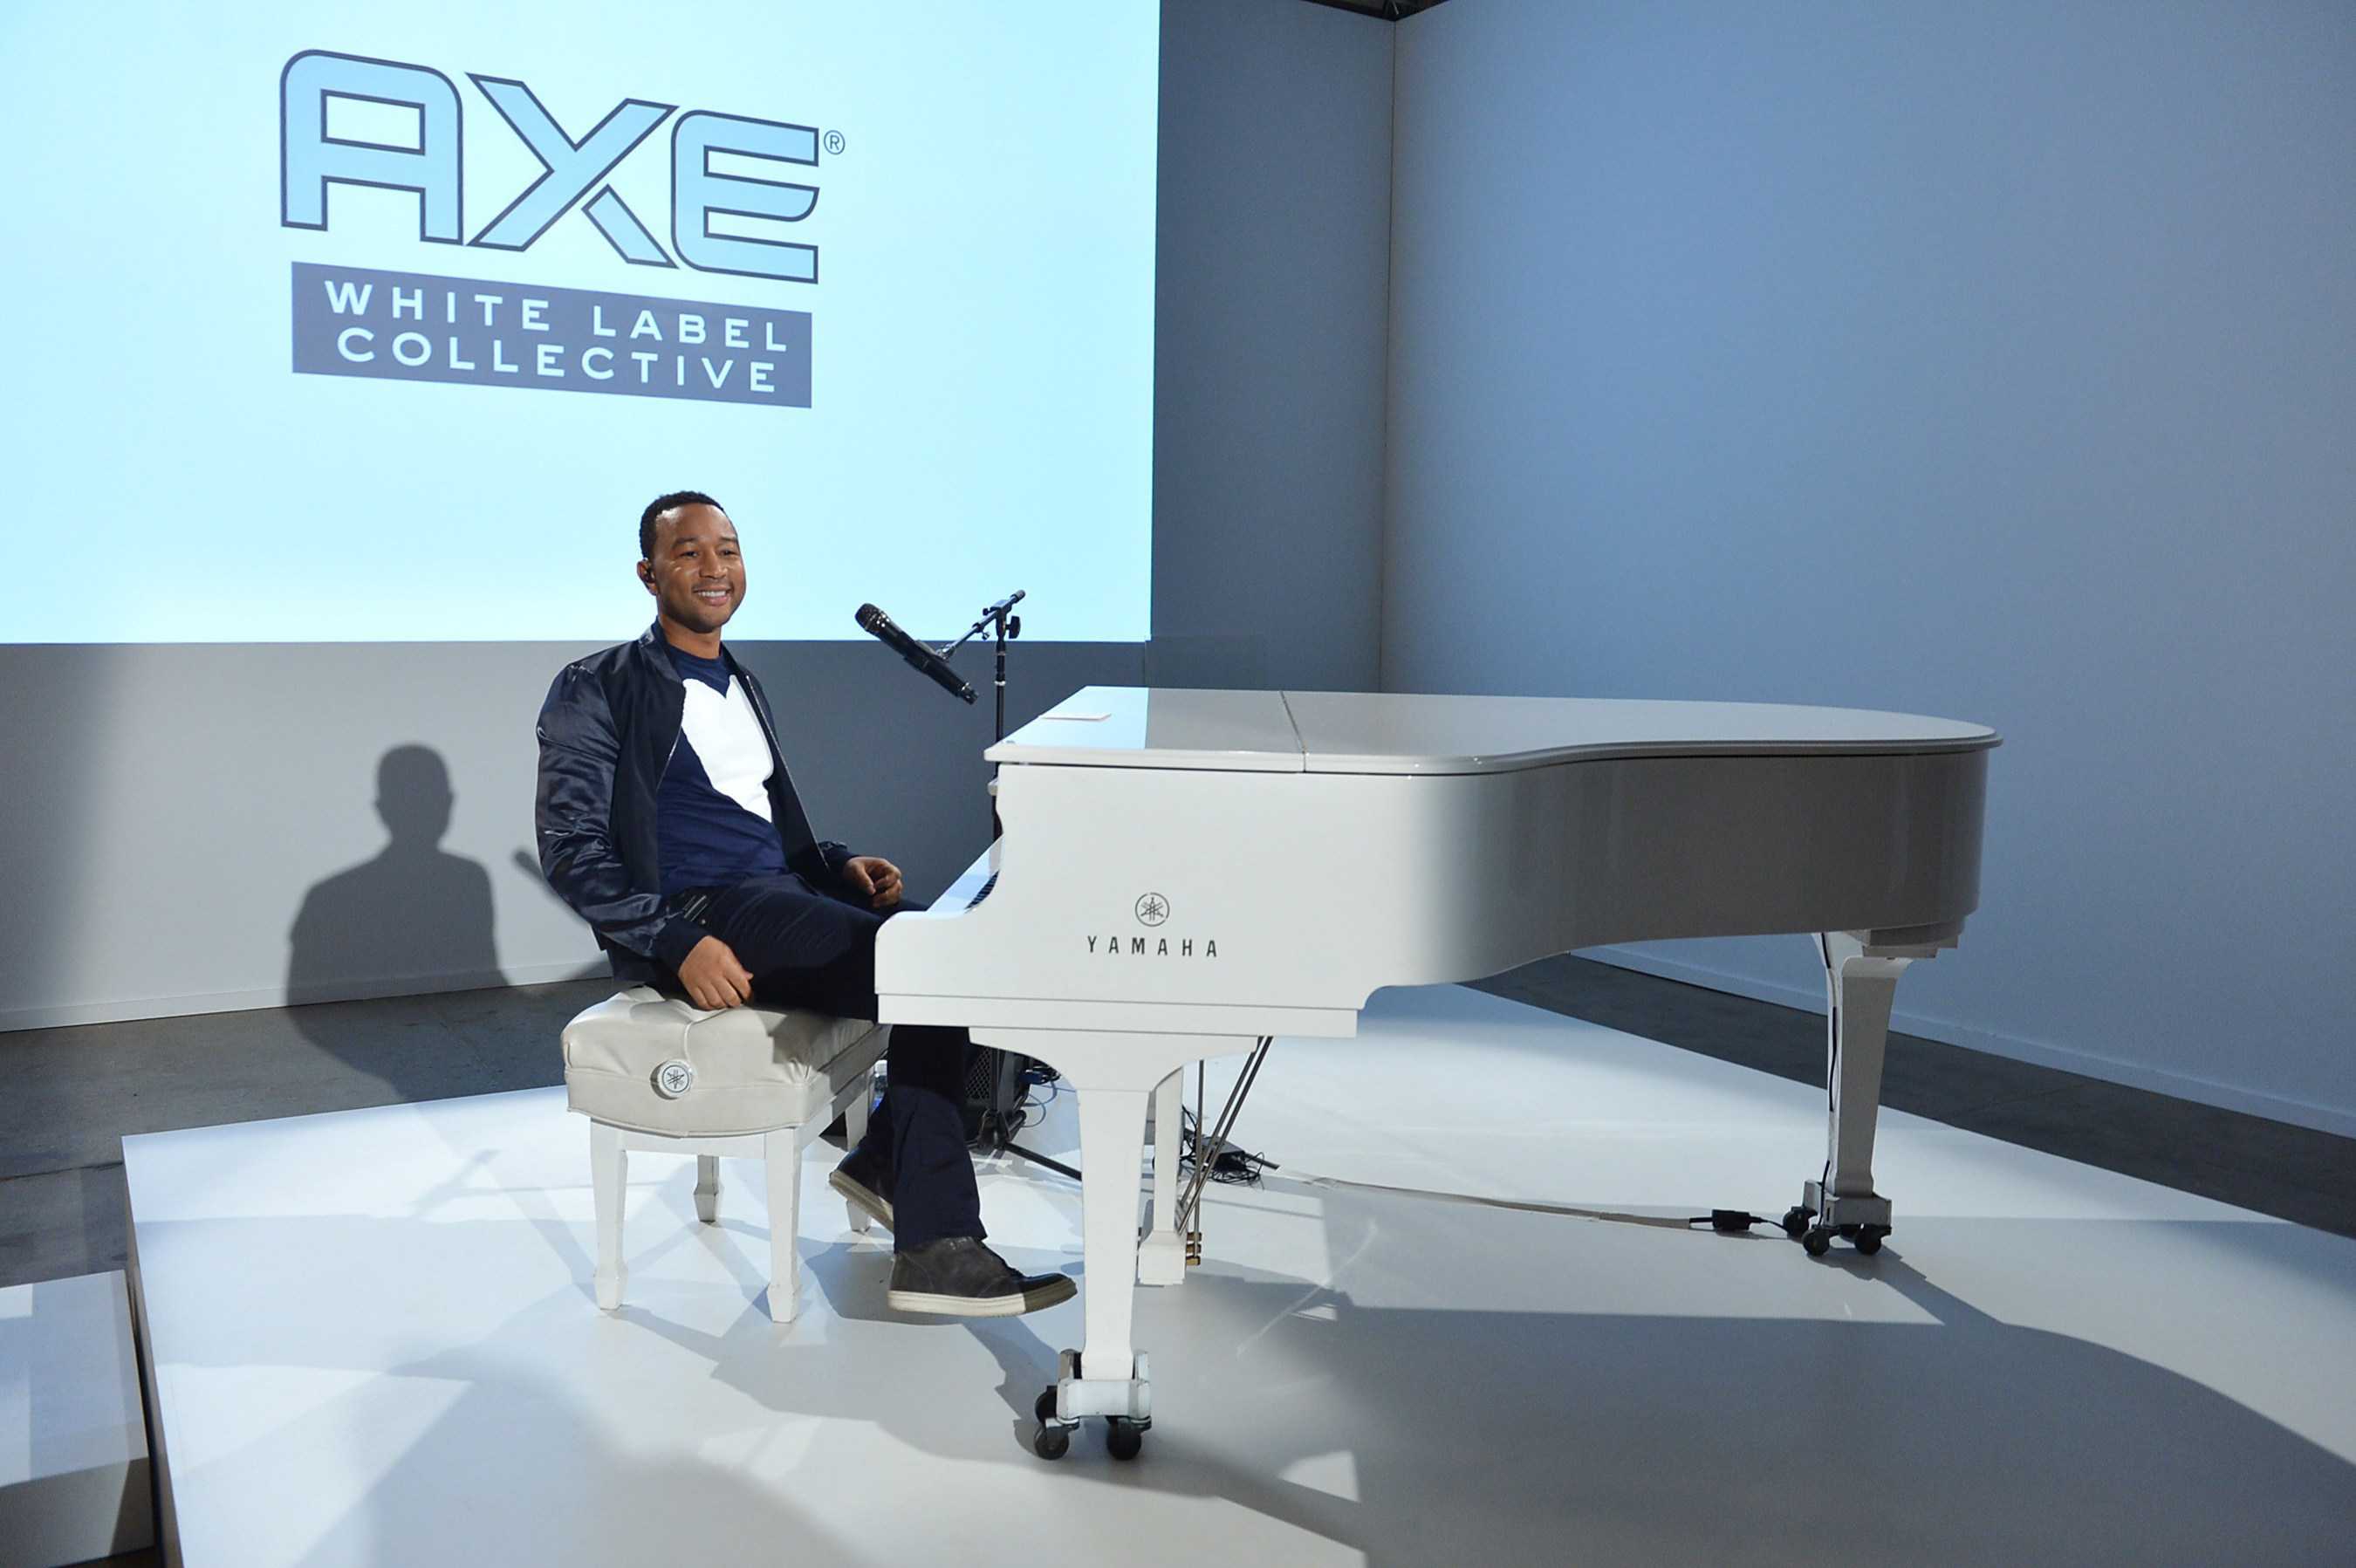 John Legend performs during the AXE White Label Collective launch at The Garage in NYC. Starting January 20, AXE and Legend invite emerging musicians to join the White Label Collective mentorship program.  (Photo by Slaven Vlasic/Getty Images for AXE)